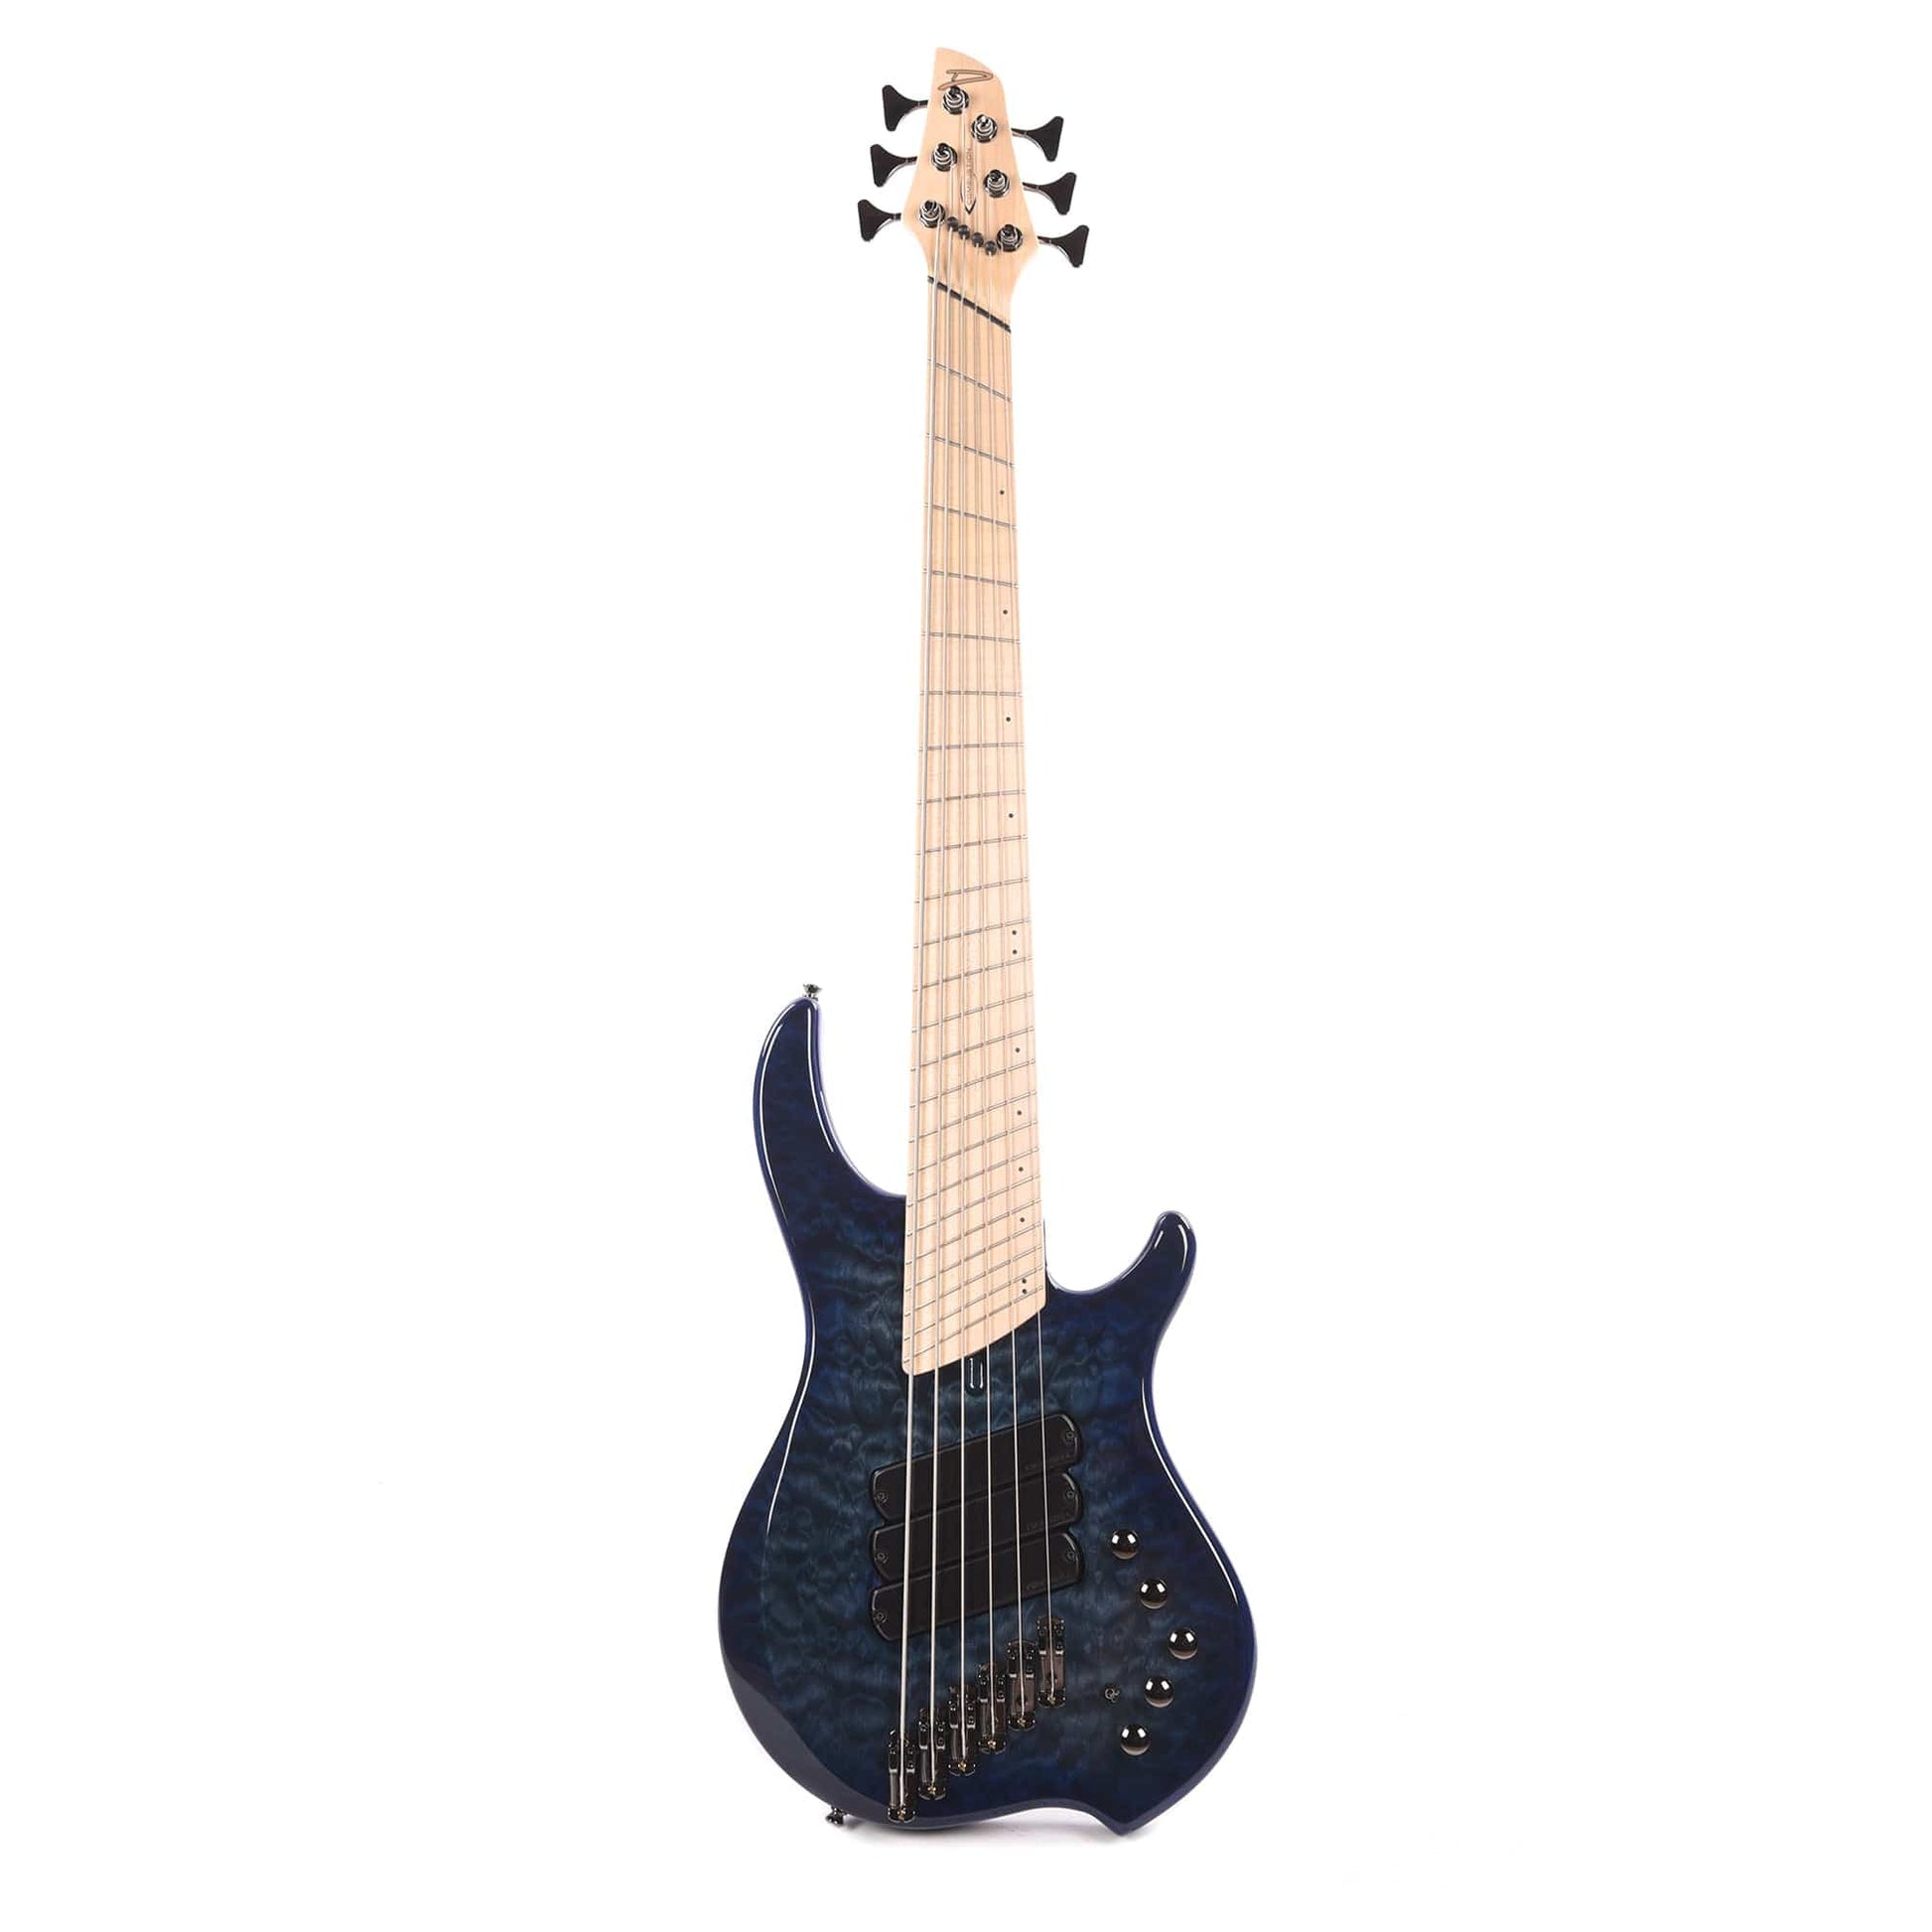 Dingwall Combustion 6-String Swamp Ash/Quilted Maple Indigo Burst Bass Guitars / 4-String